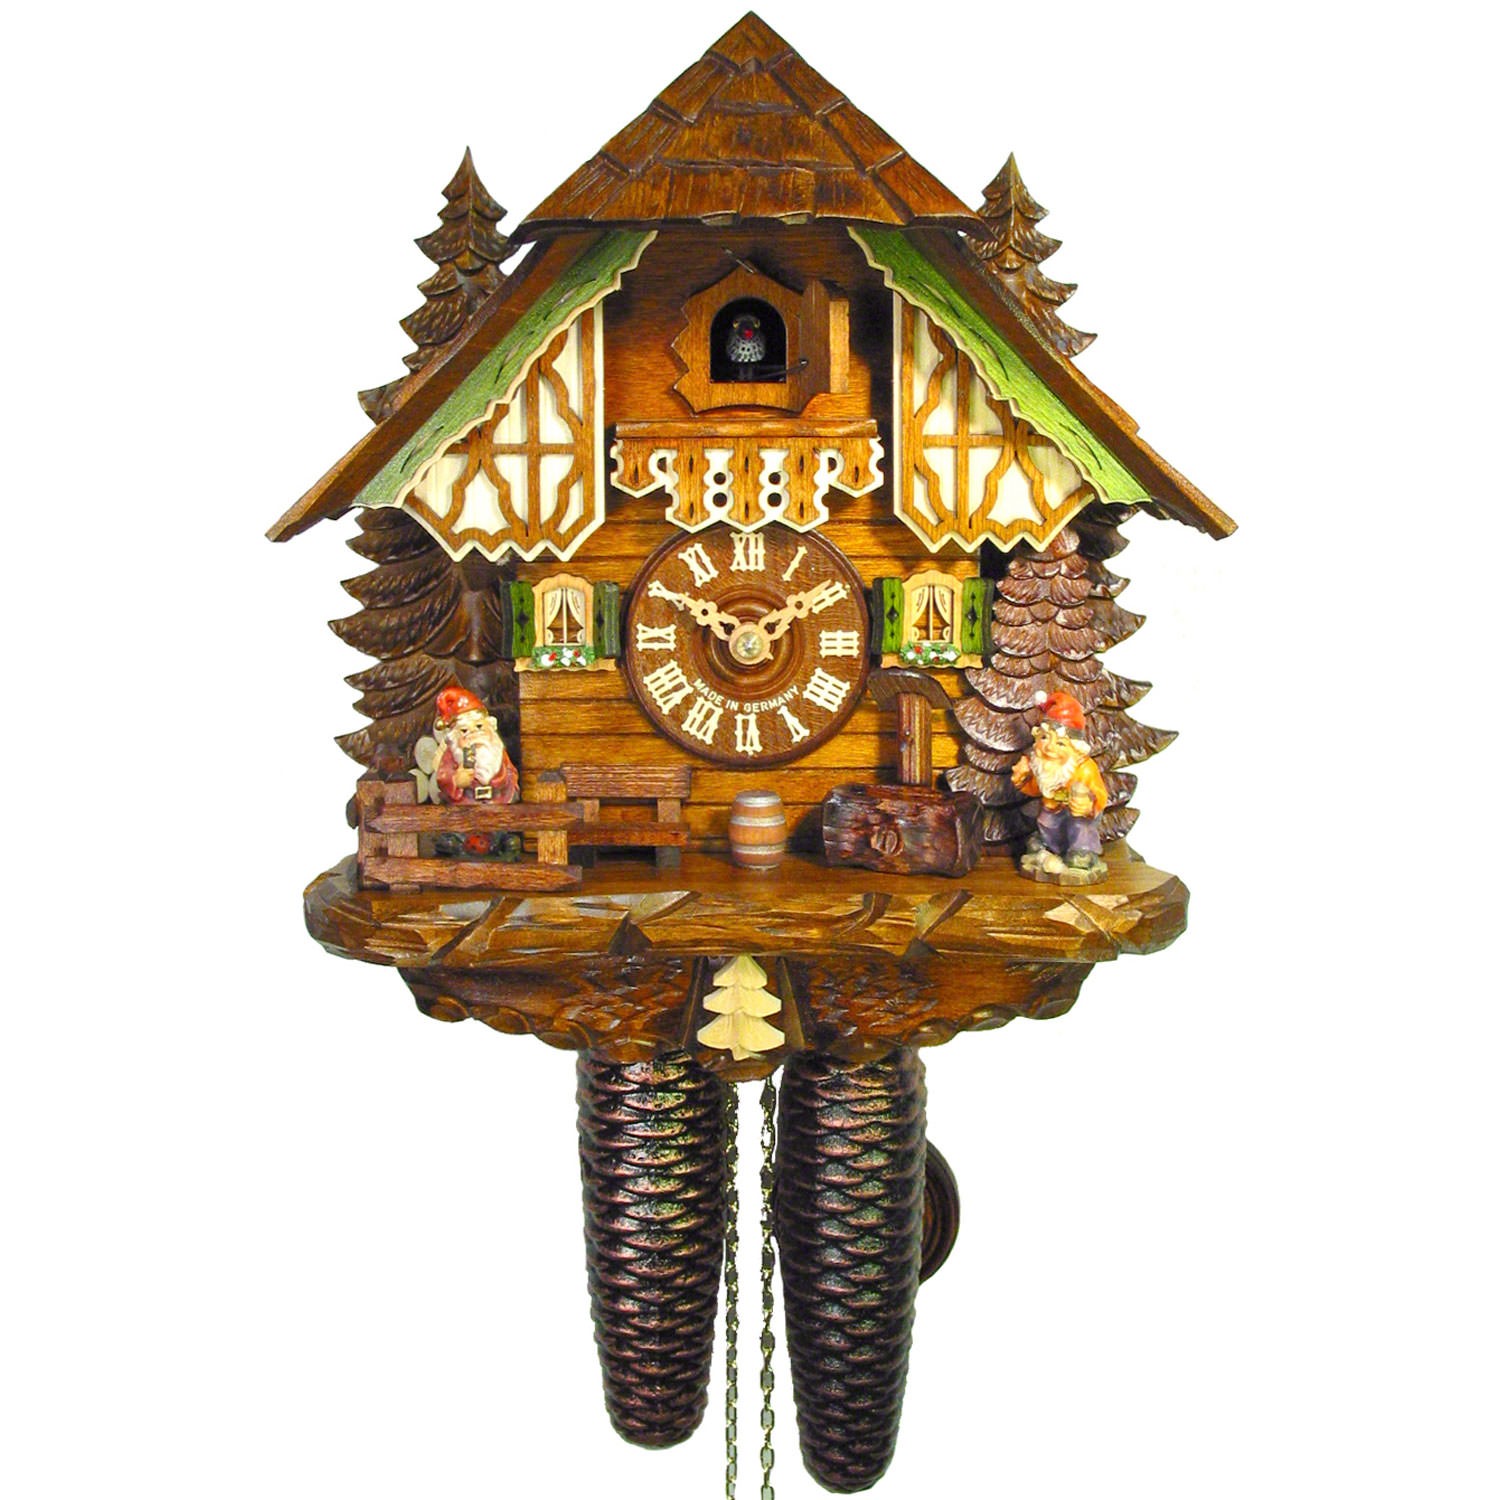 Cuckoo Clock Parts Diagram Cuckoo Clock 8 Day Movement Chalet Style 28cm by August Schwer Of Cuckoo Clock Parts Diagram